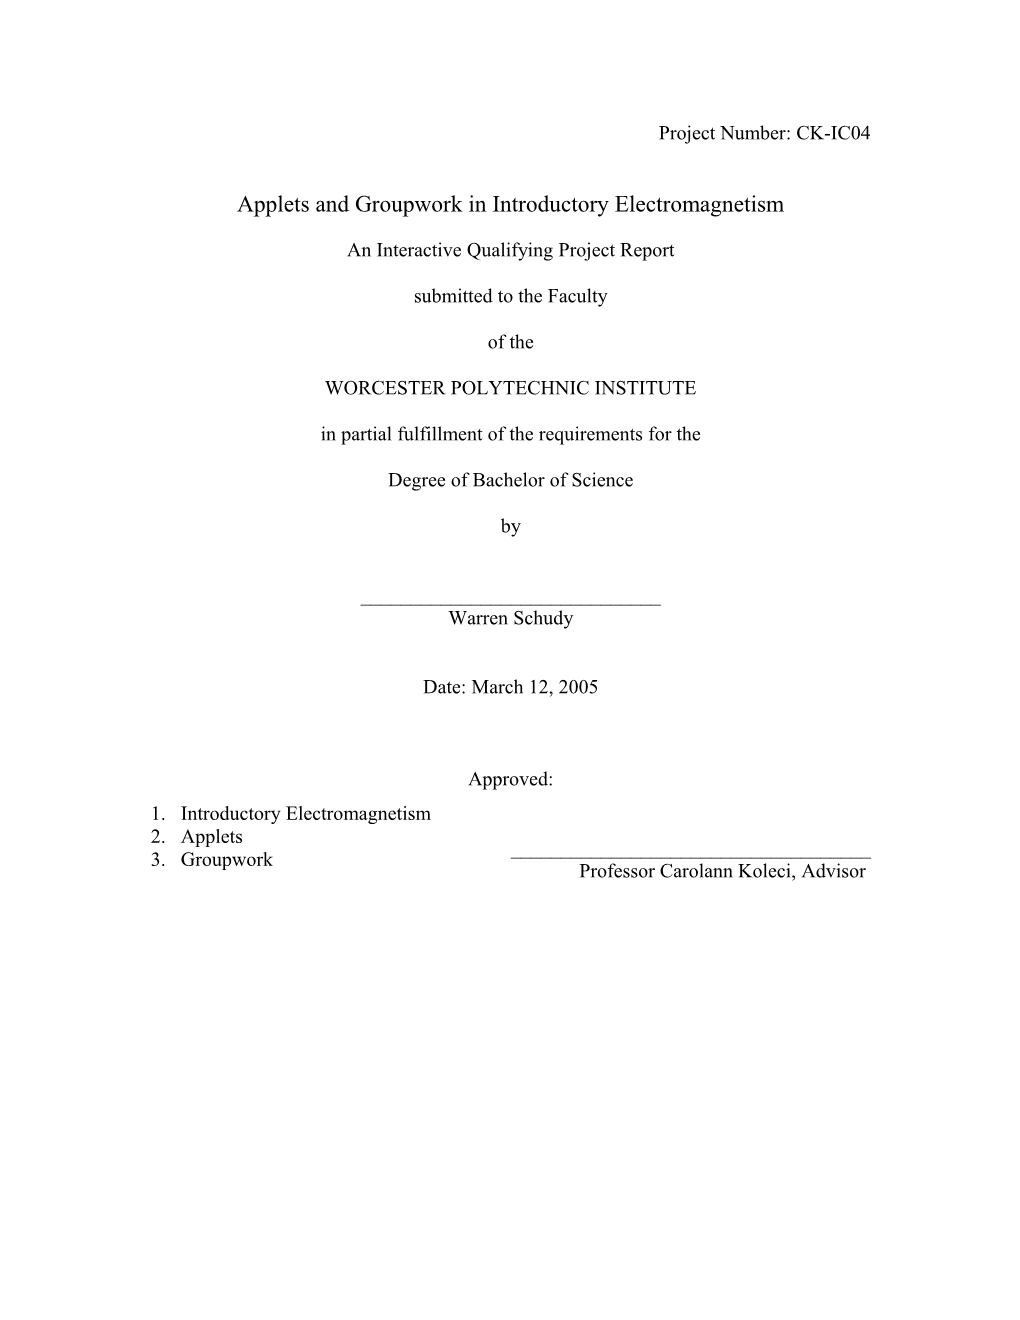 Applets and Groupwork in Introductory Electromagnetism